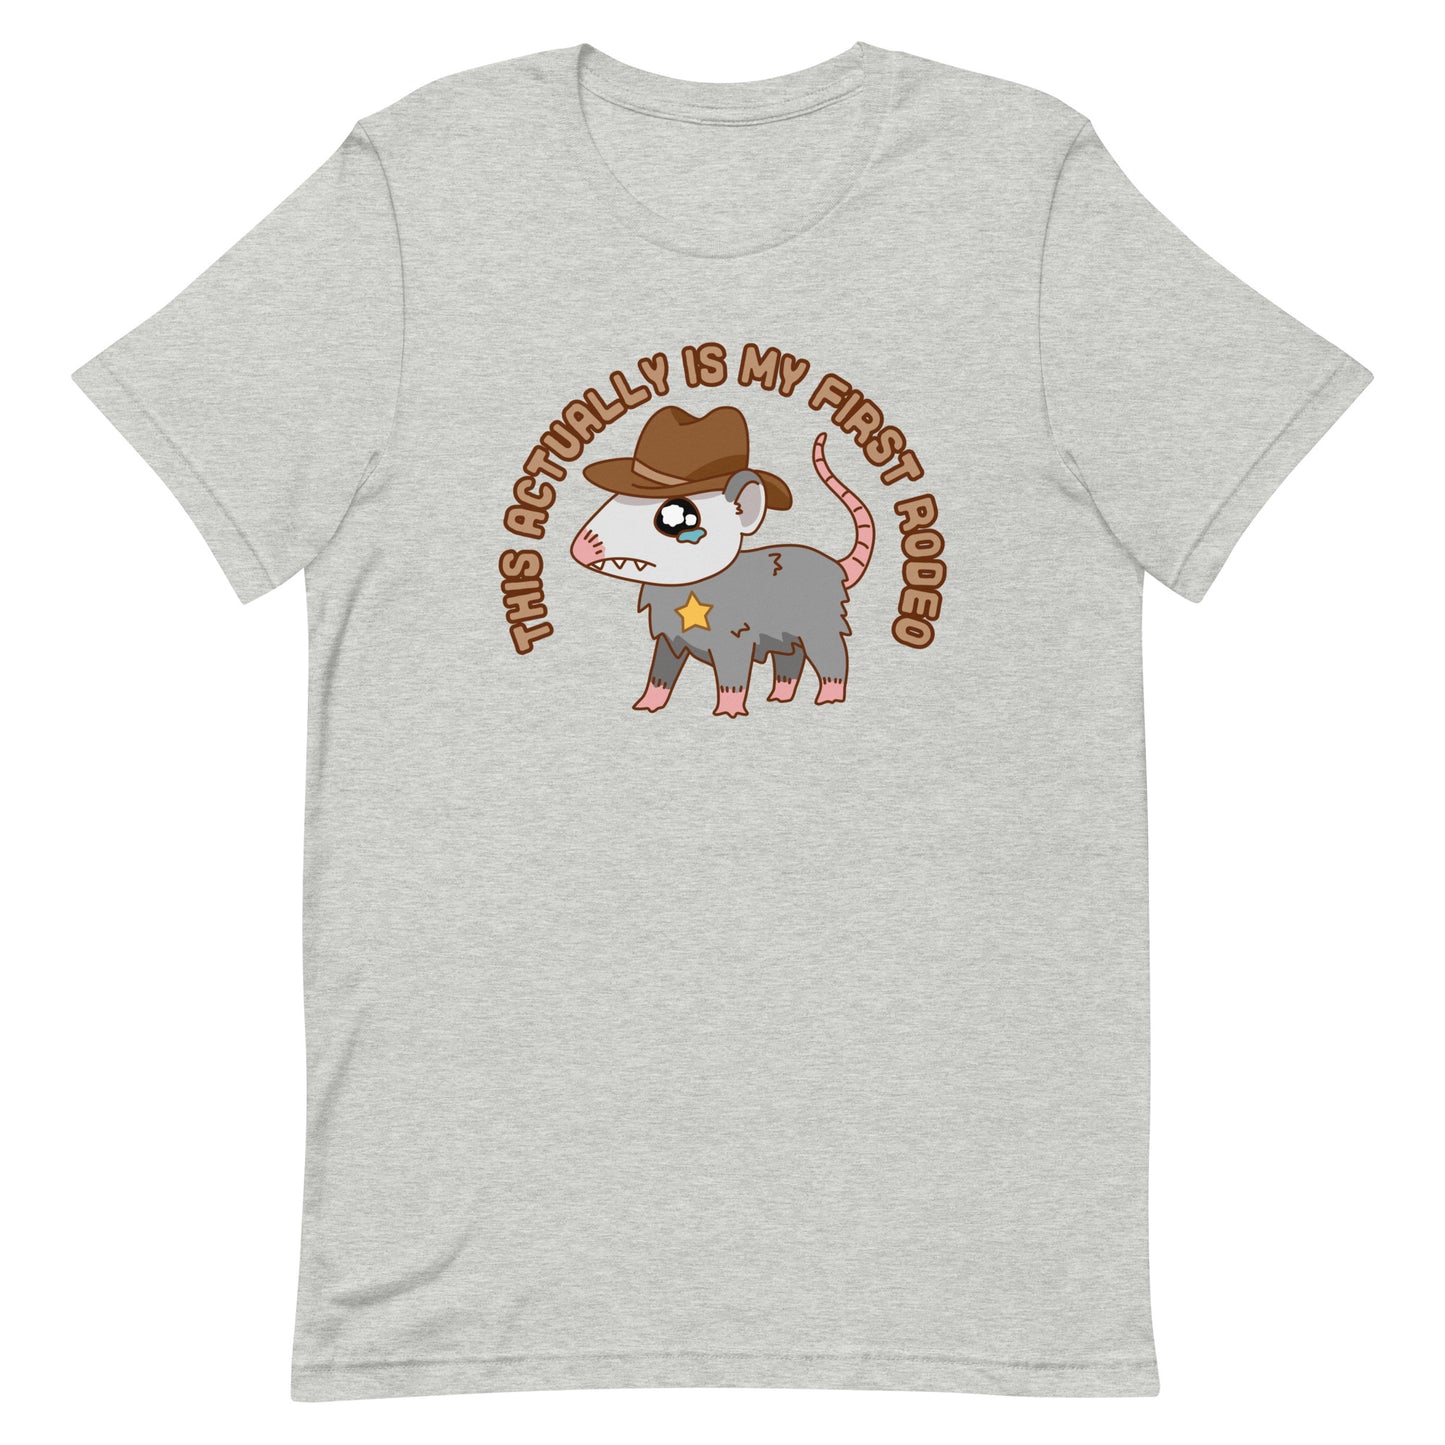 A grey crewneck t-shirt featuring an illustration of a cute and nervous possum wearing a cowboy hat and sherrif's star badge. Text above the possum in an arc reads "this actually is my first rodeo".